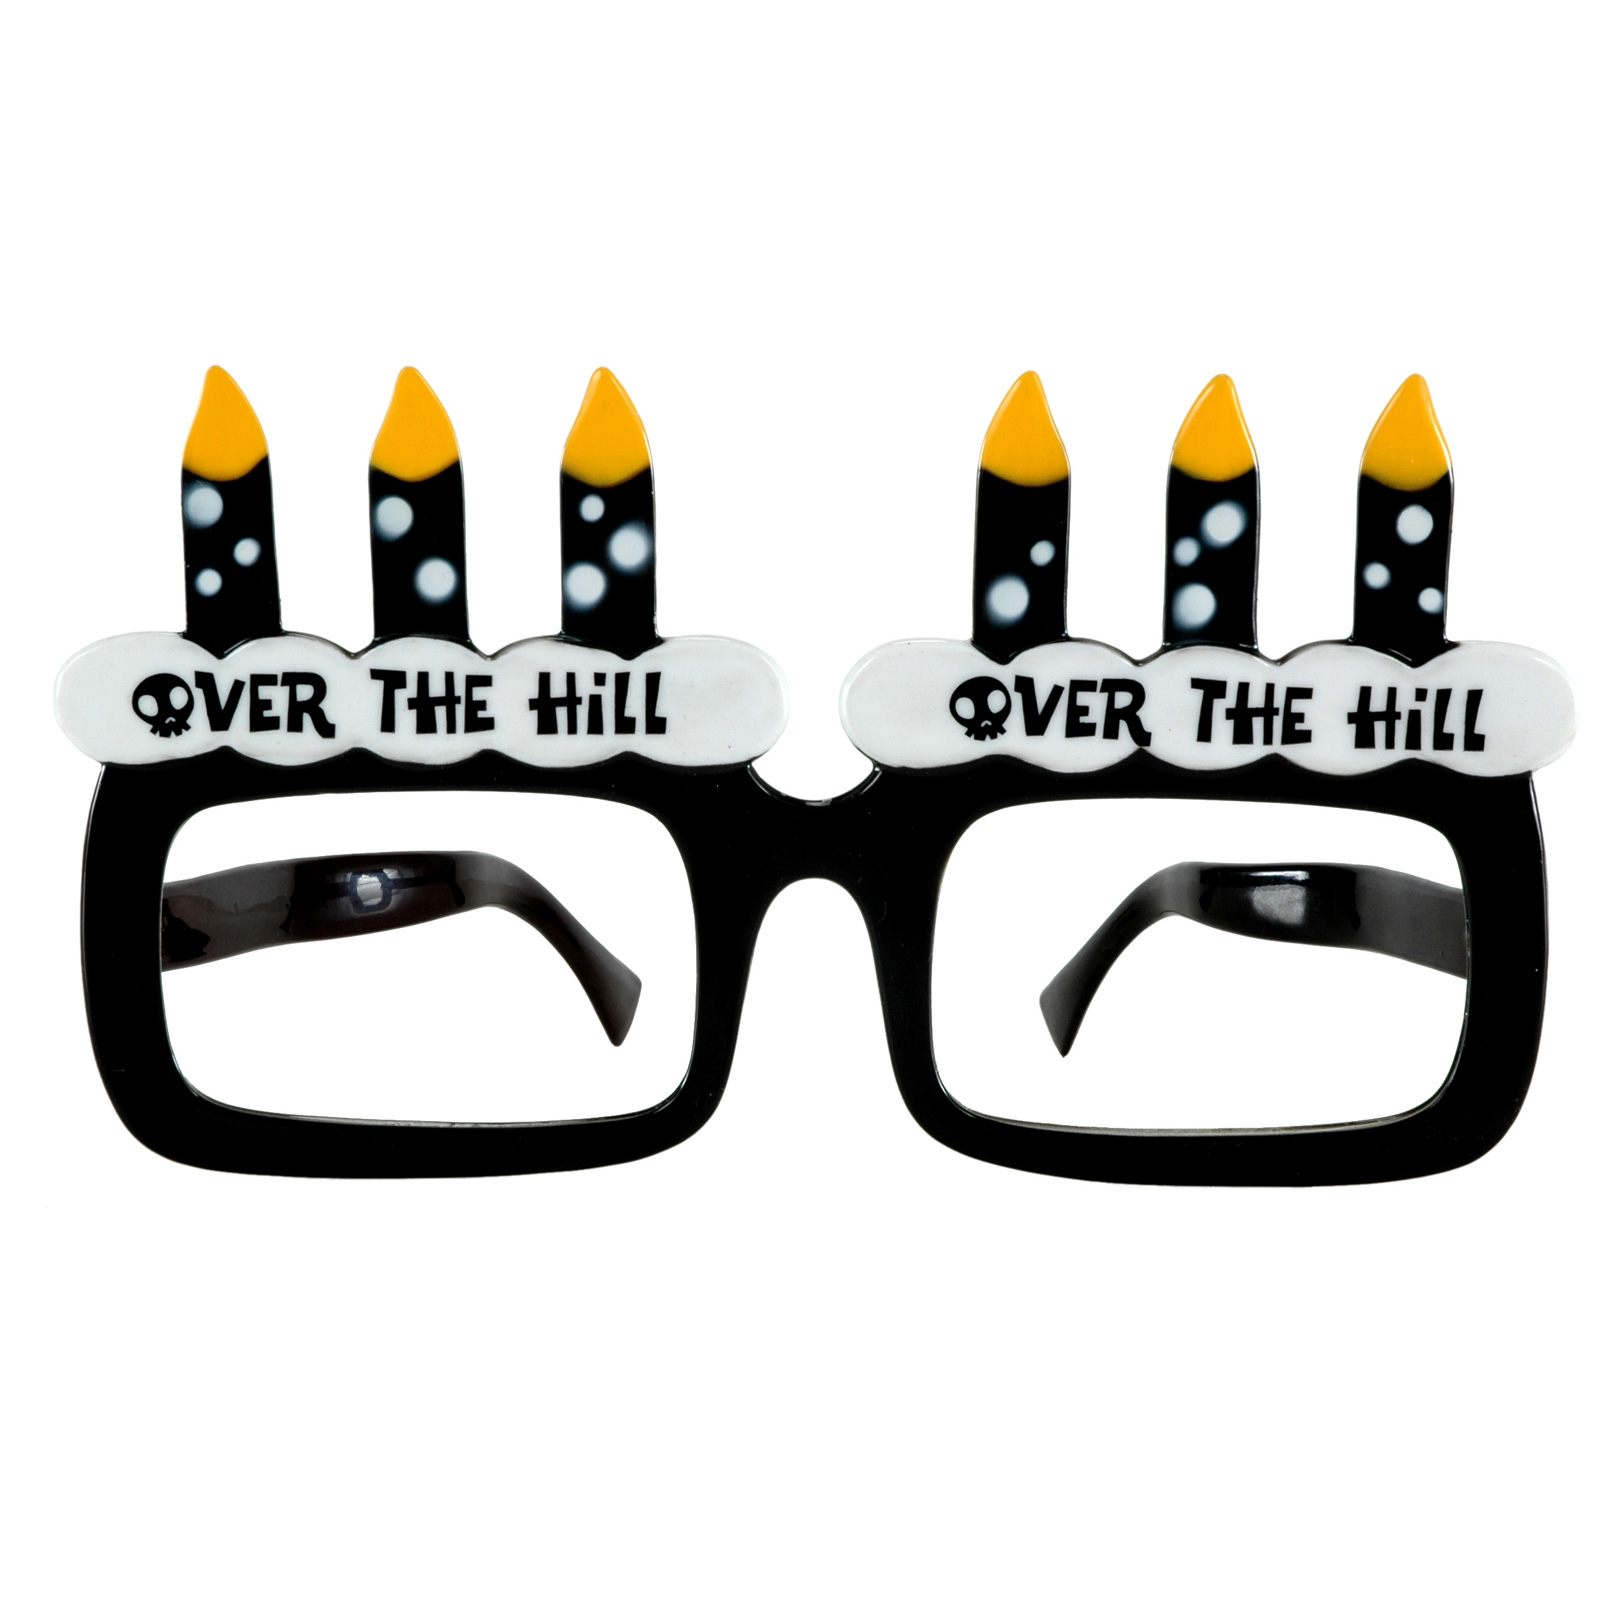 Over The Hill Image - ClipArt Best